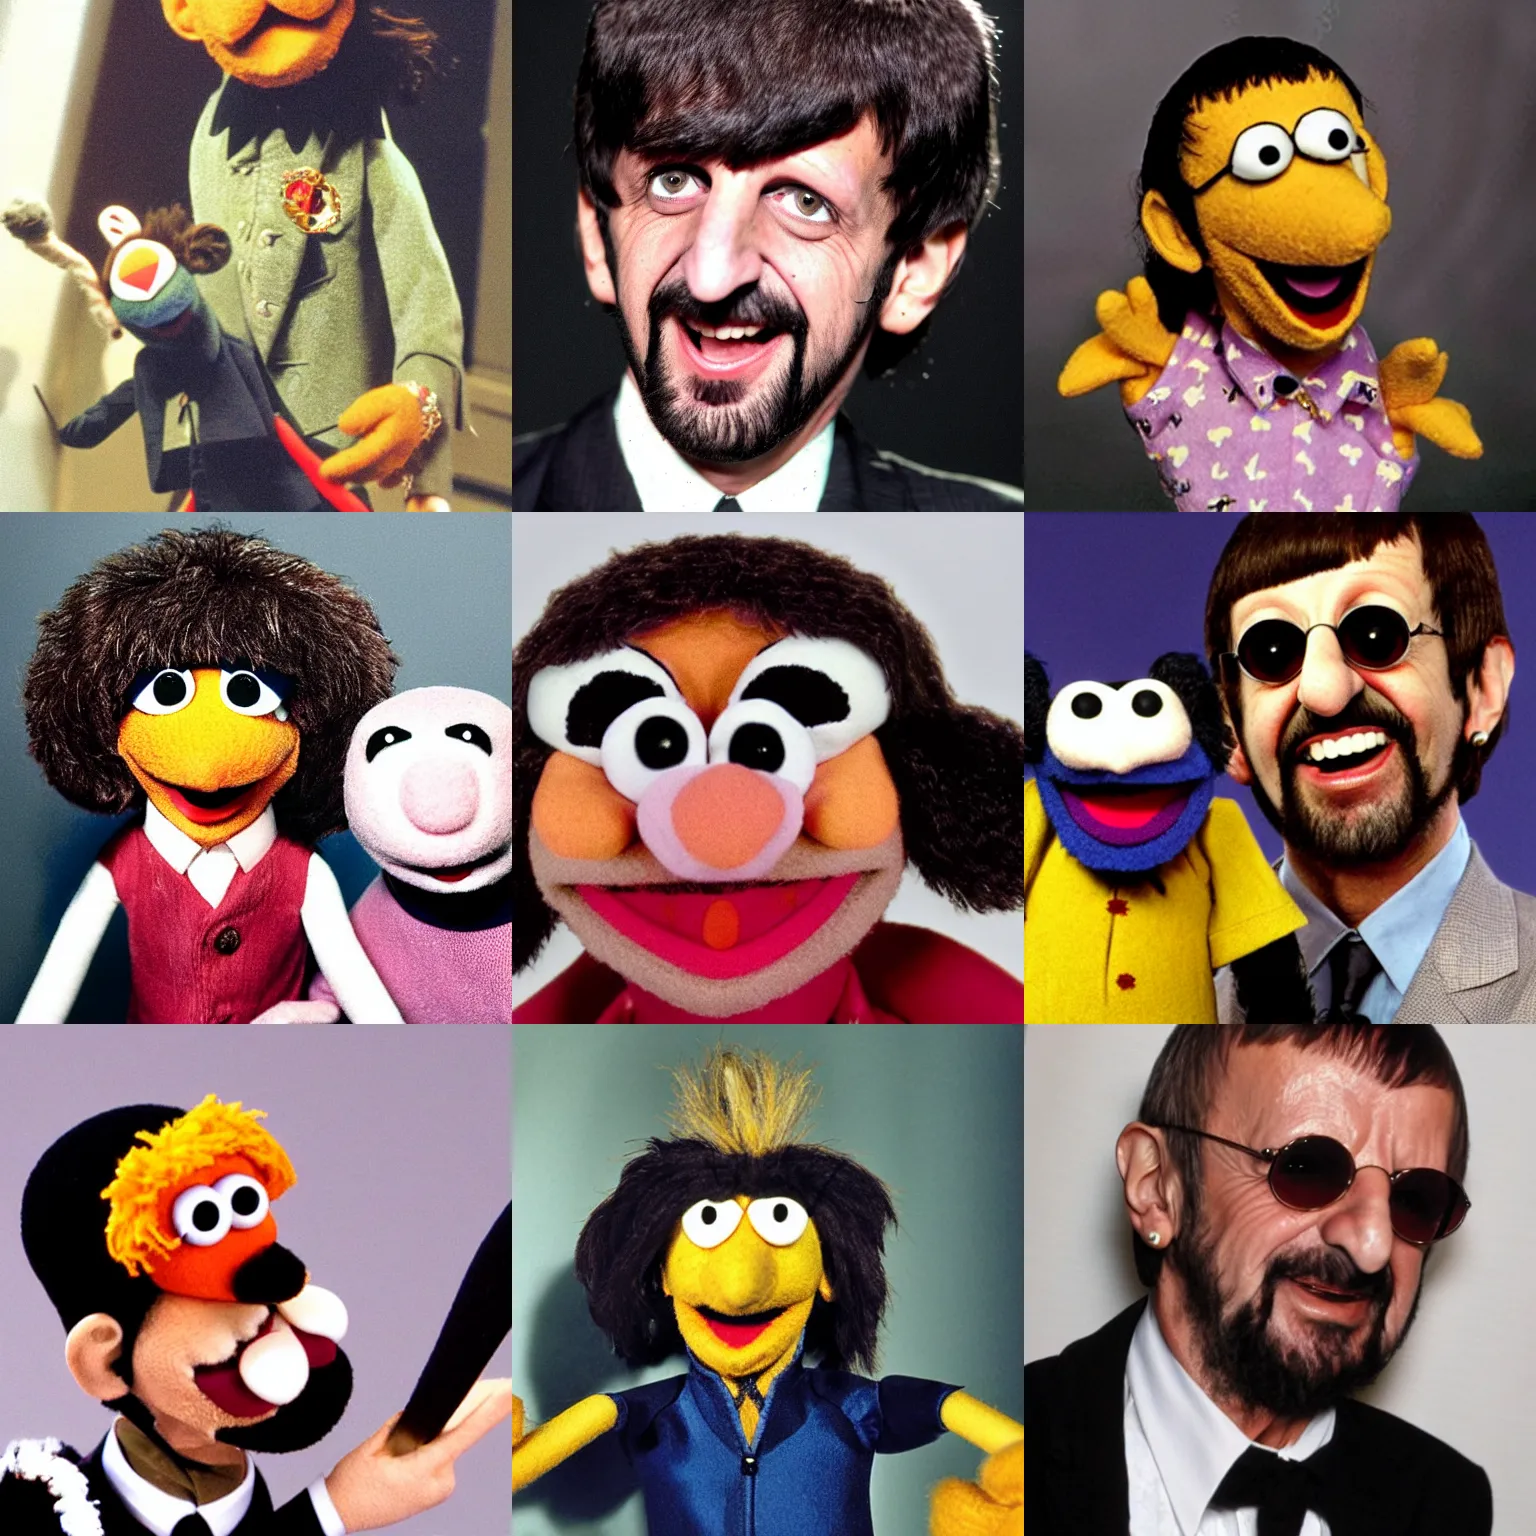 Prompt: Ringo Starr as a muppet